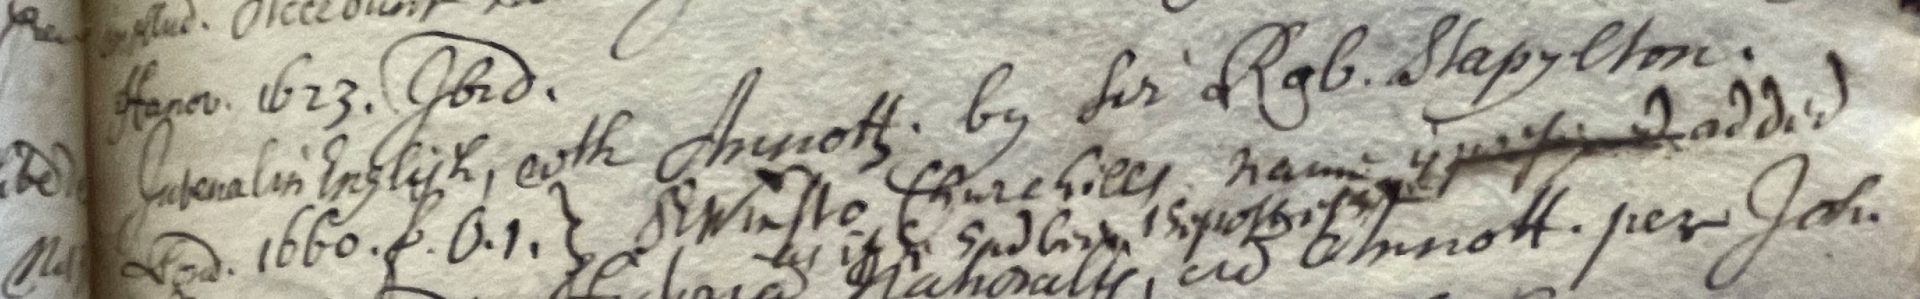 Sir Winstō Churchills name is added as it had been his possession” marginal note in MS Rawl. C851 f.21